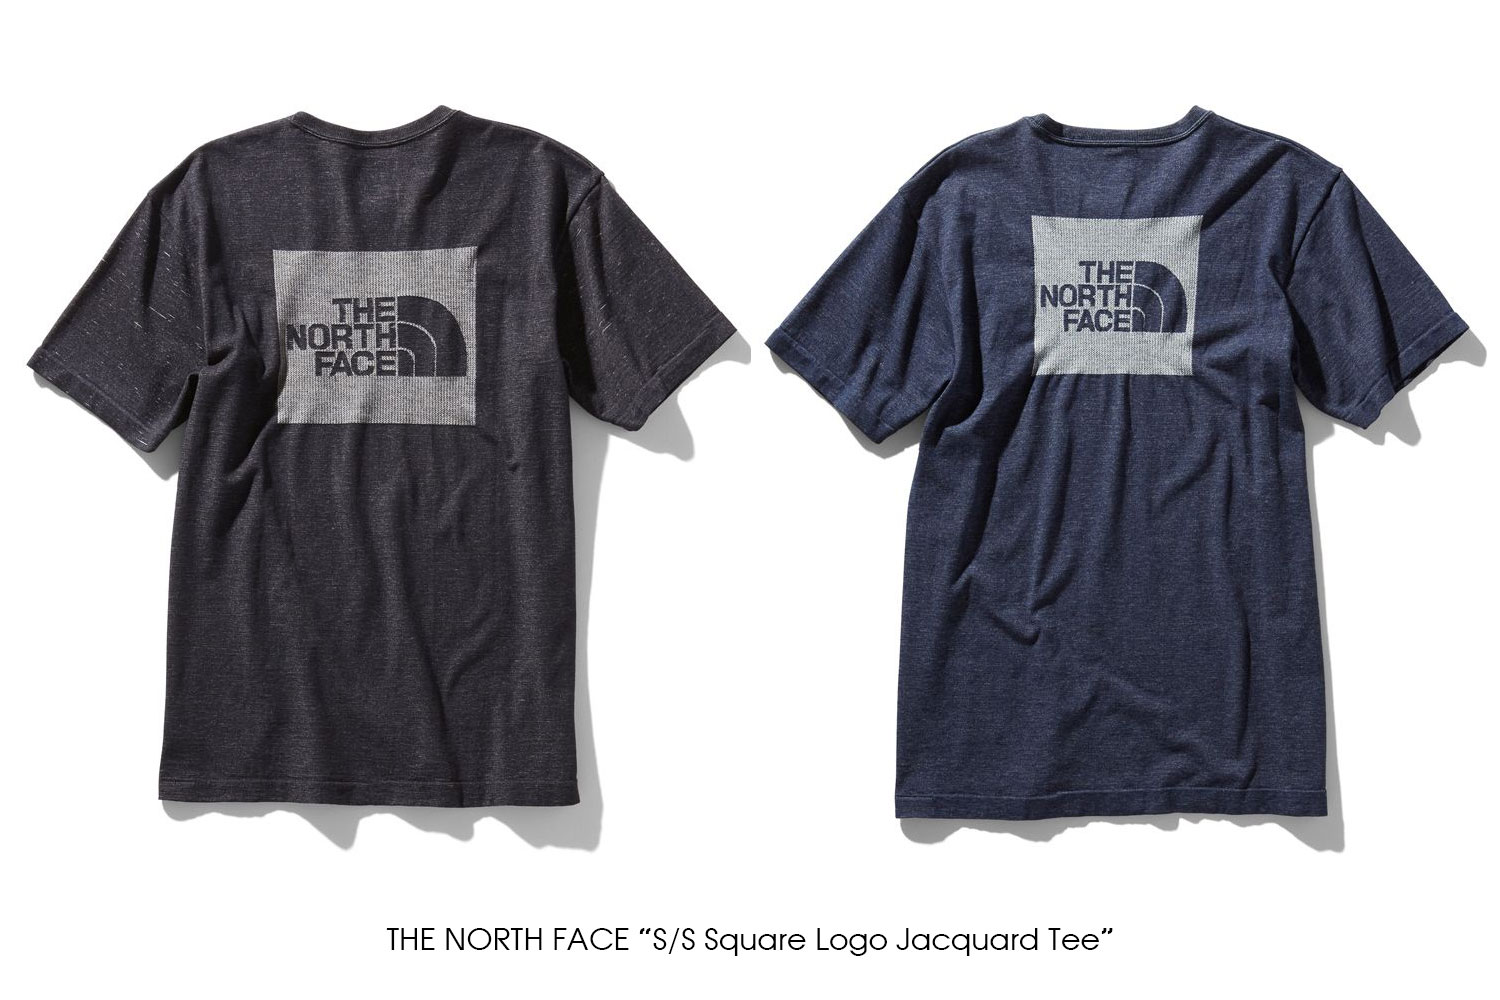 THE NORTH FACE "S/S Square Logo Jacquard Tee"